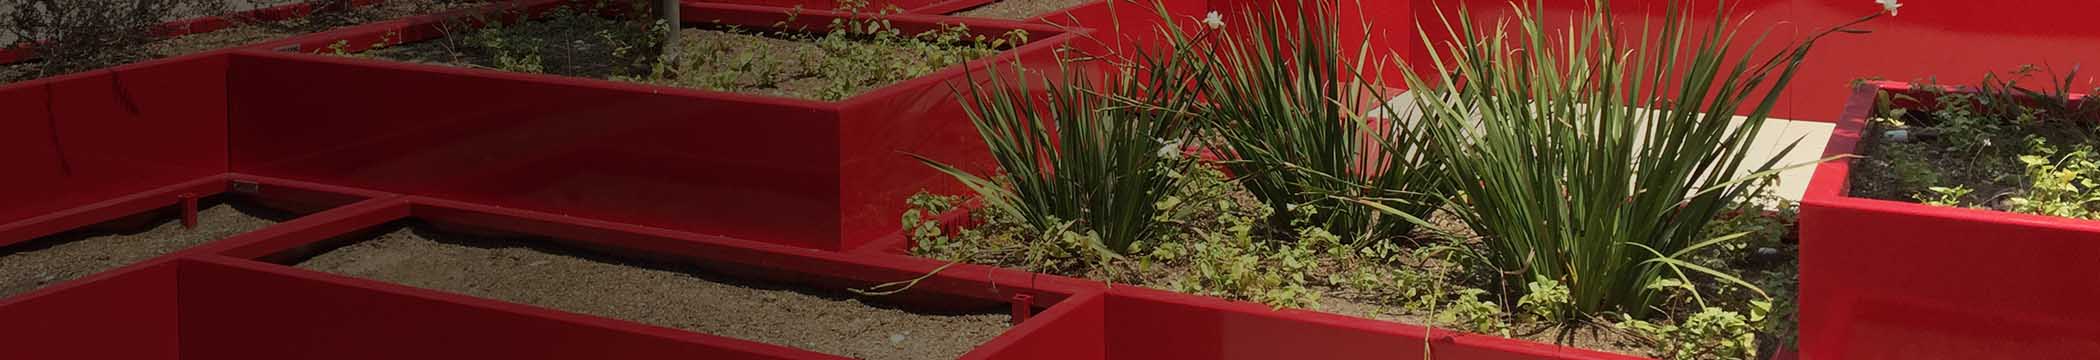 Bright Red Outdoor Planter Boxes